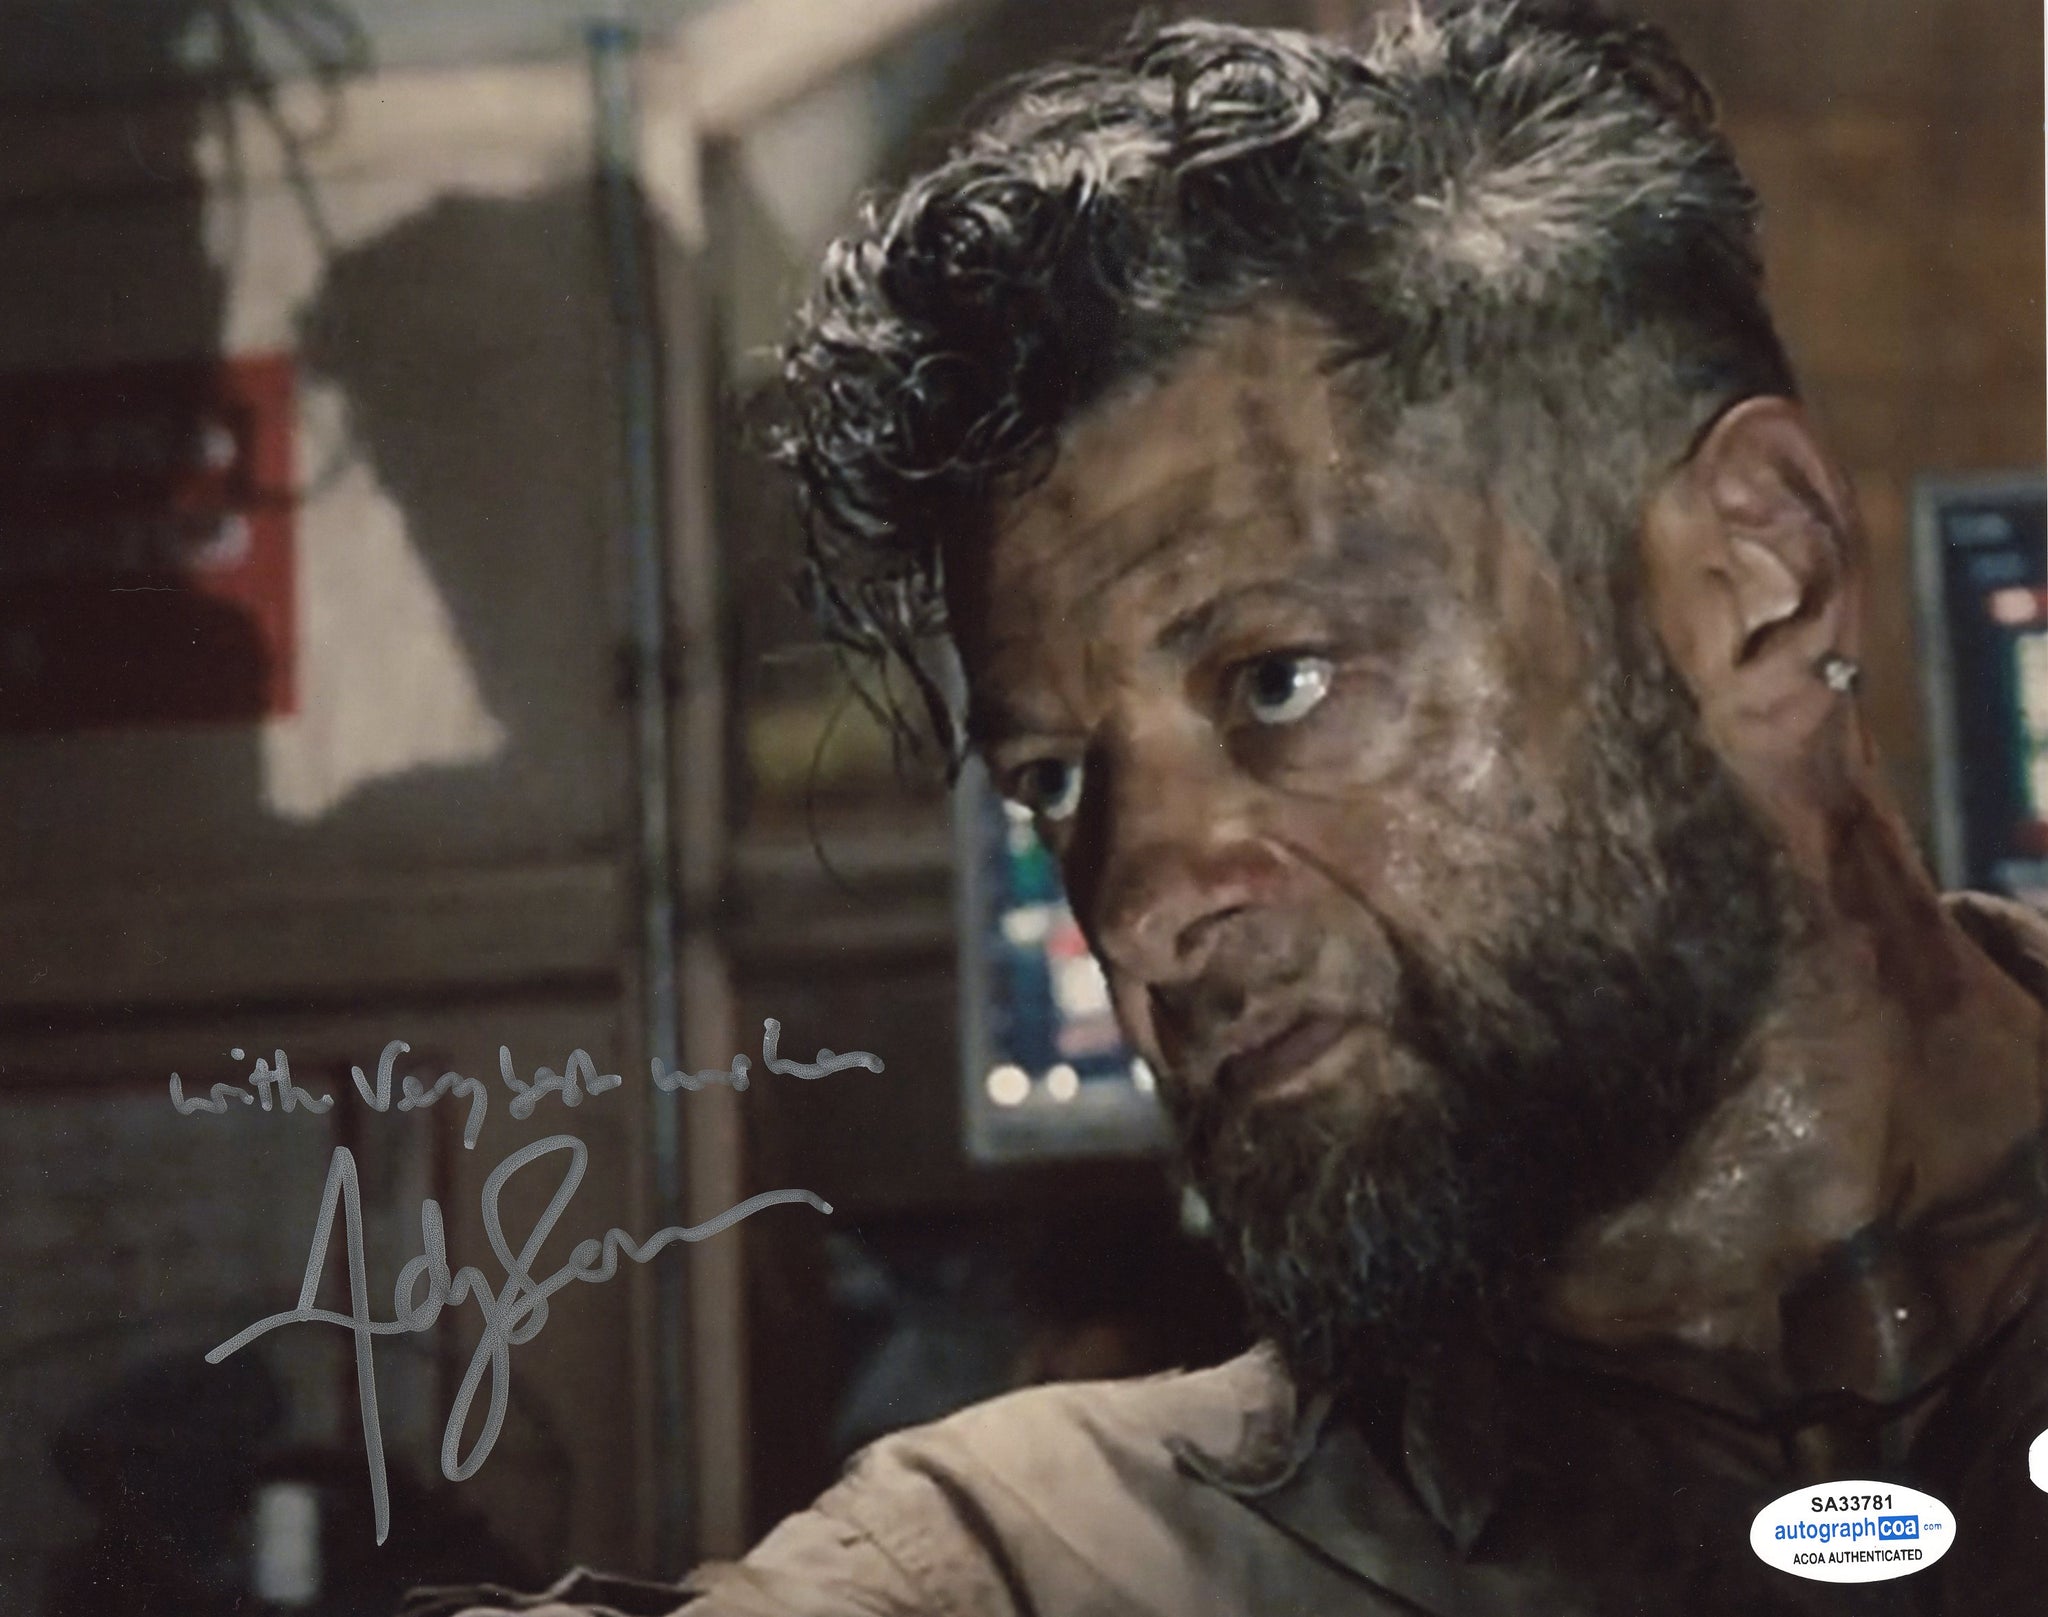 Andy Serkis Black Panther Avengers Signed Autograph 8x10 Photo ACOA #10 - Outlaw Hobbies Authentic Autographs